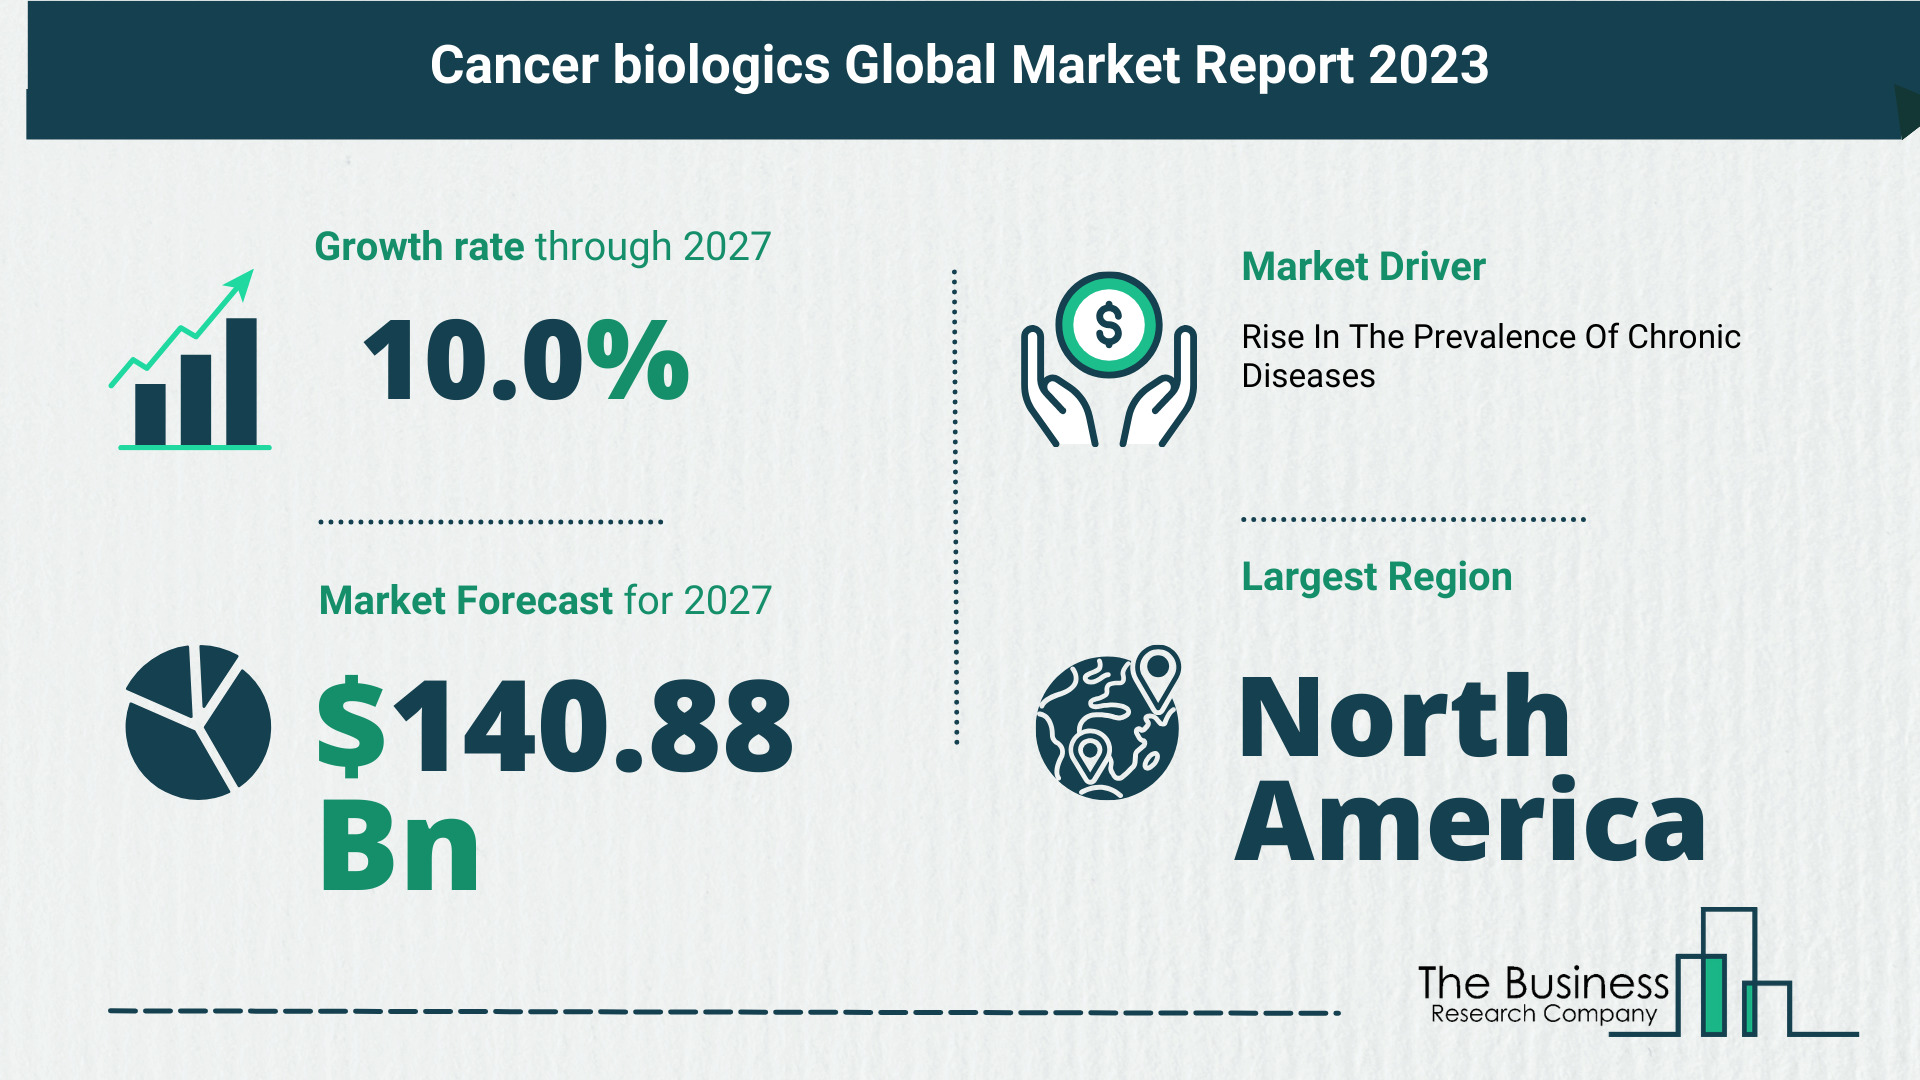 How Is The Cancer Biologics Market Expected To Grow Through 2023-2032